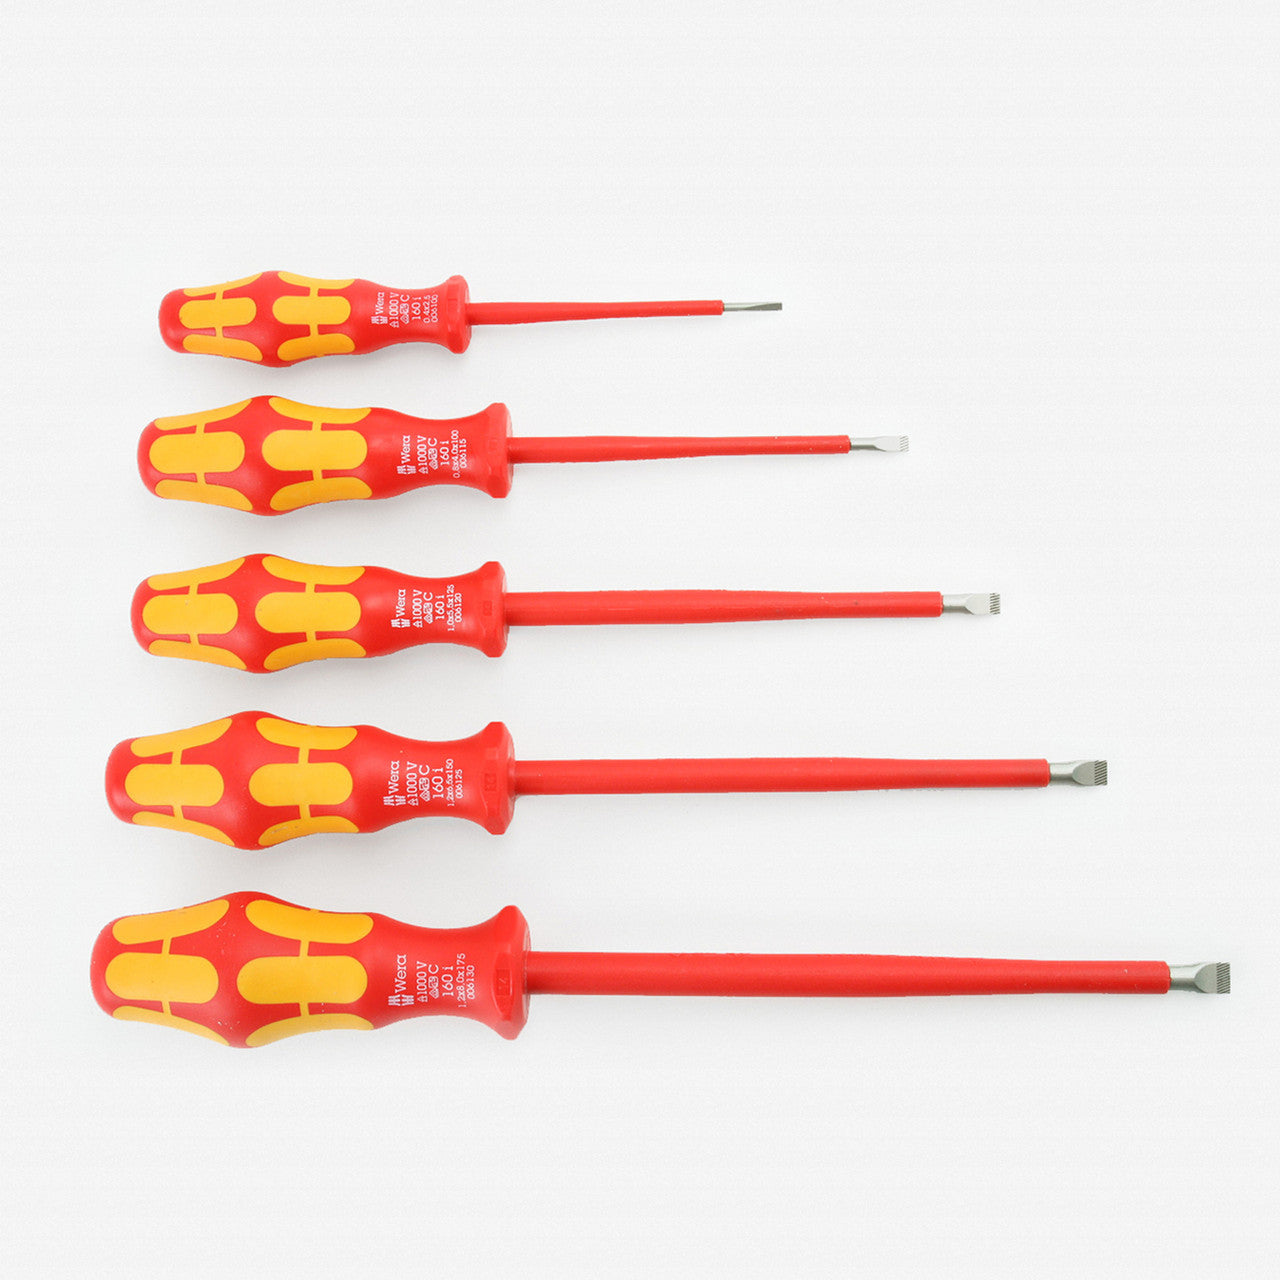 Wera 05346275001 VDE Insulated Slotted Screwdriver Set